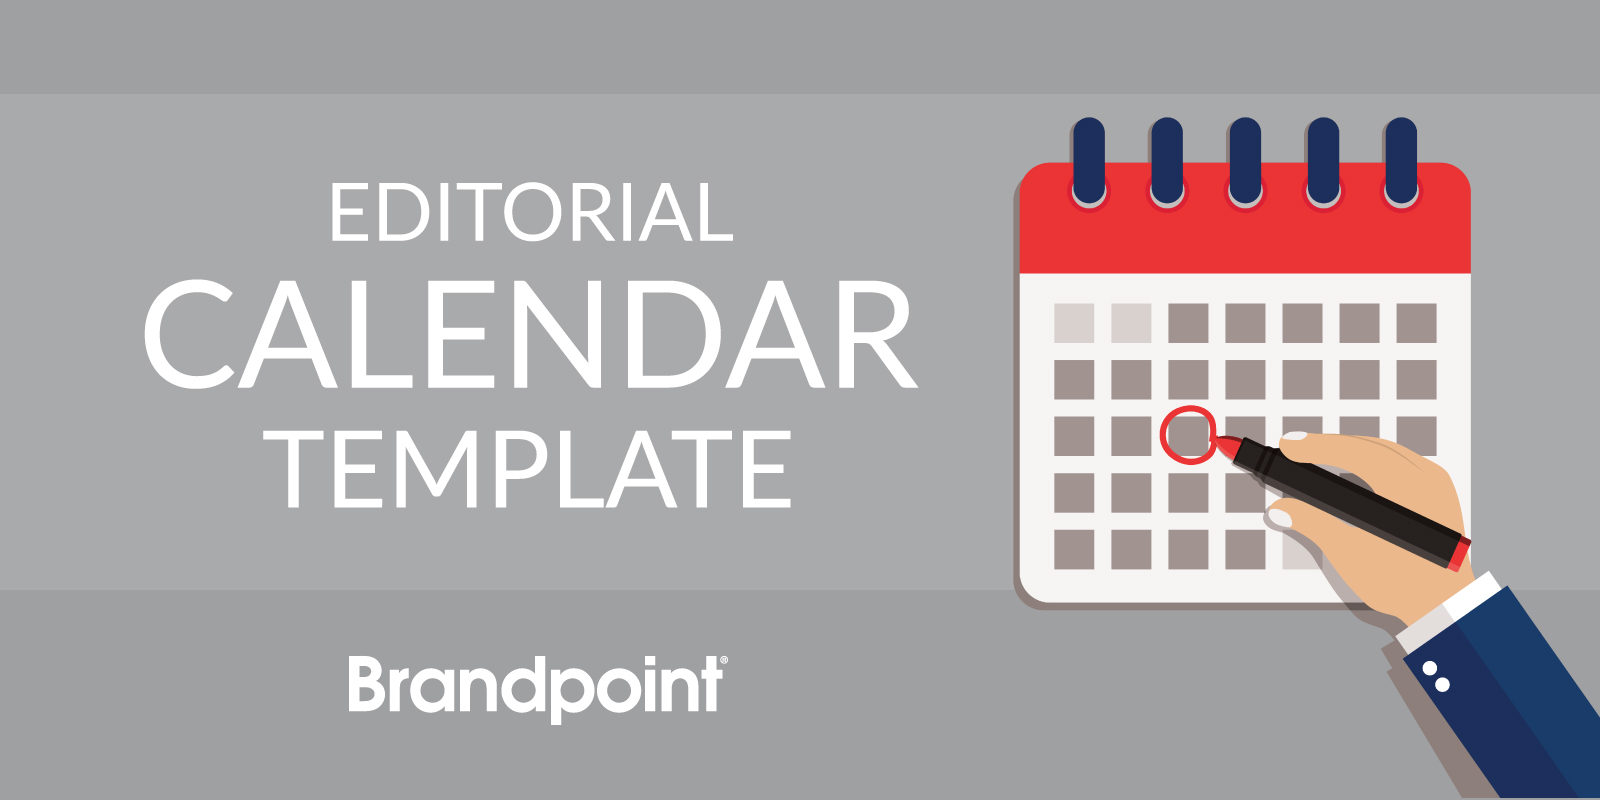 An image showing a calendar with someone circling a day in red. It reads "editorial calendar template" by Brandpoint.